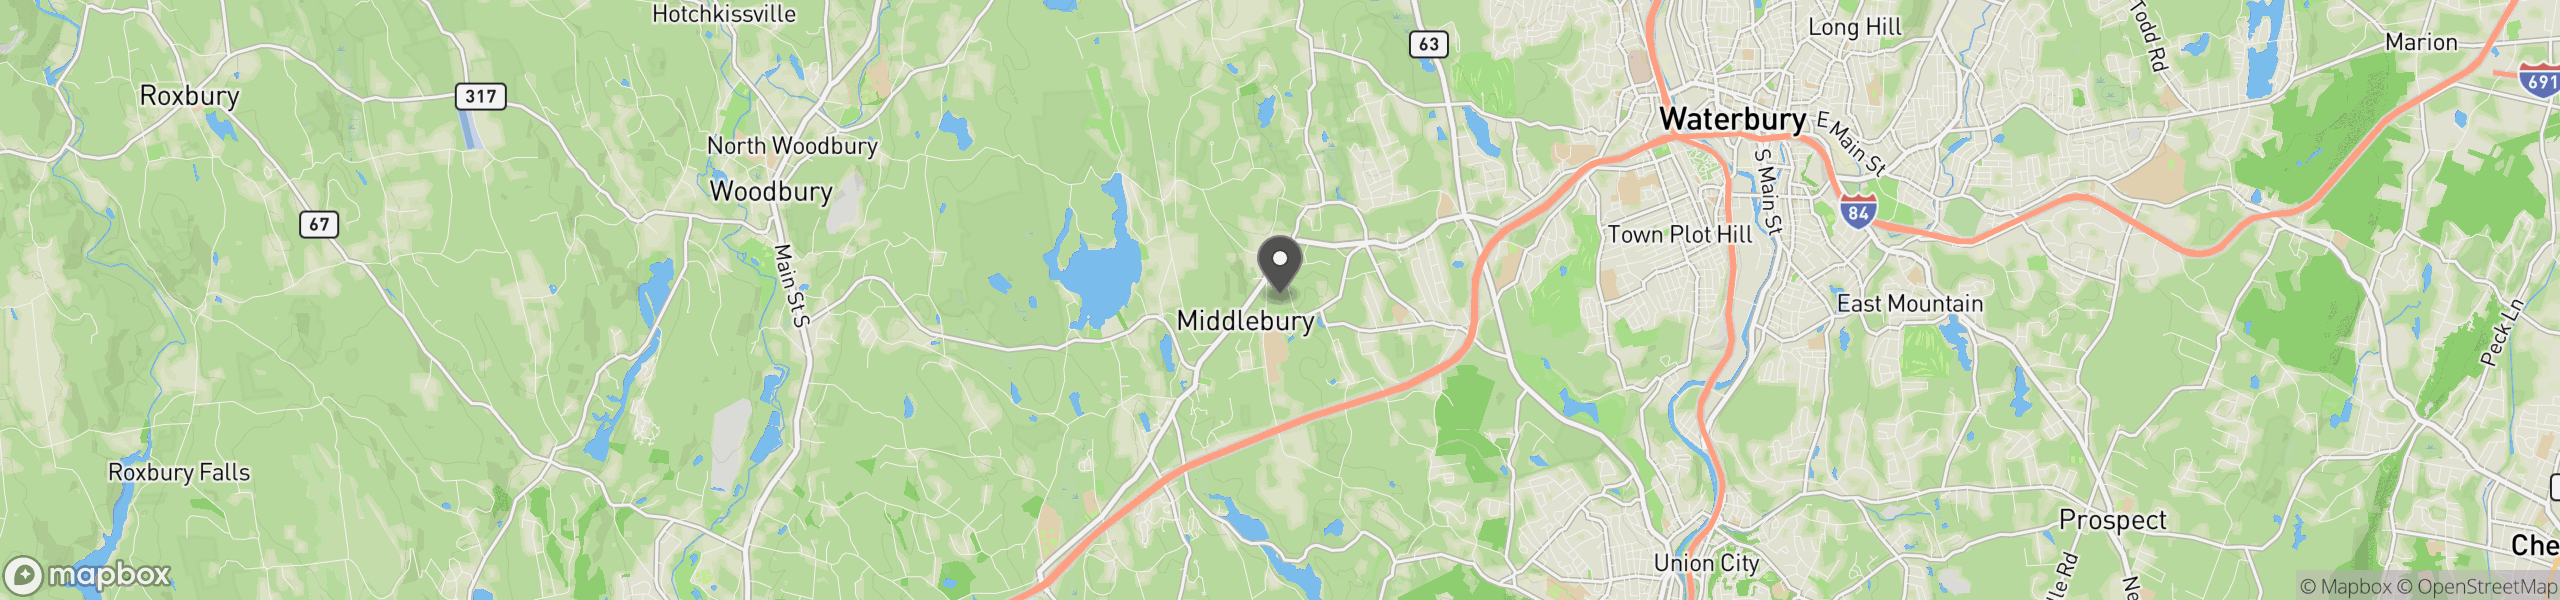 Middlebury, CT 06762